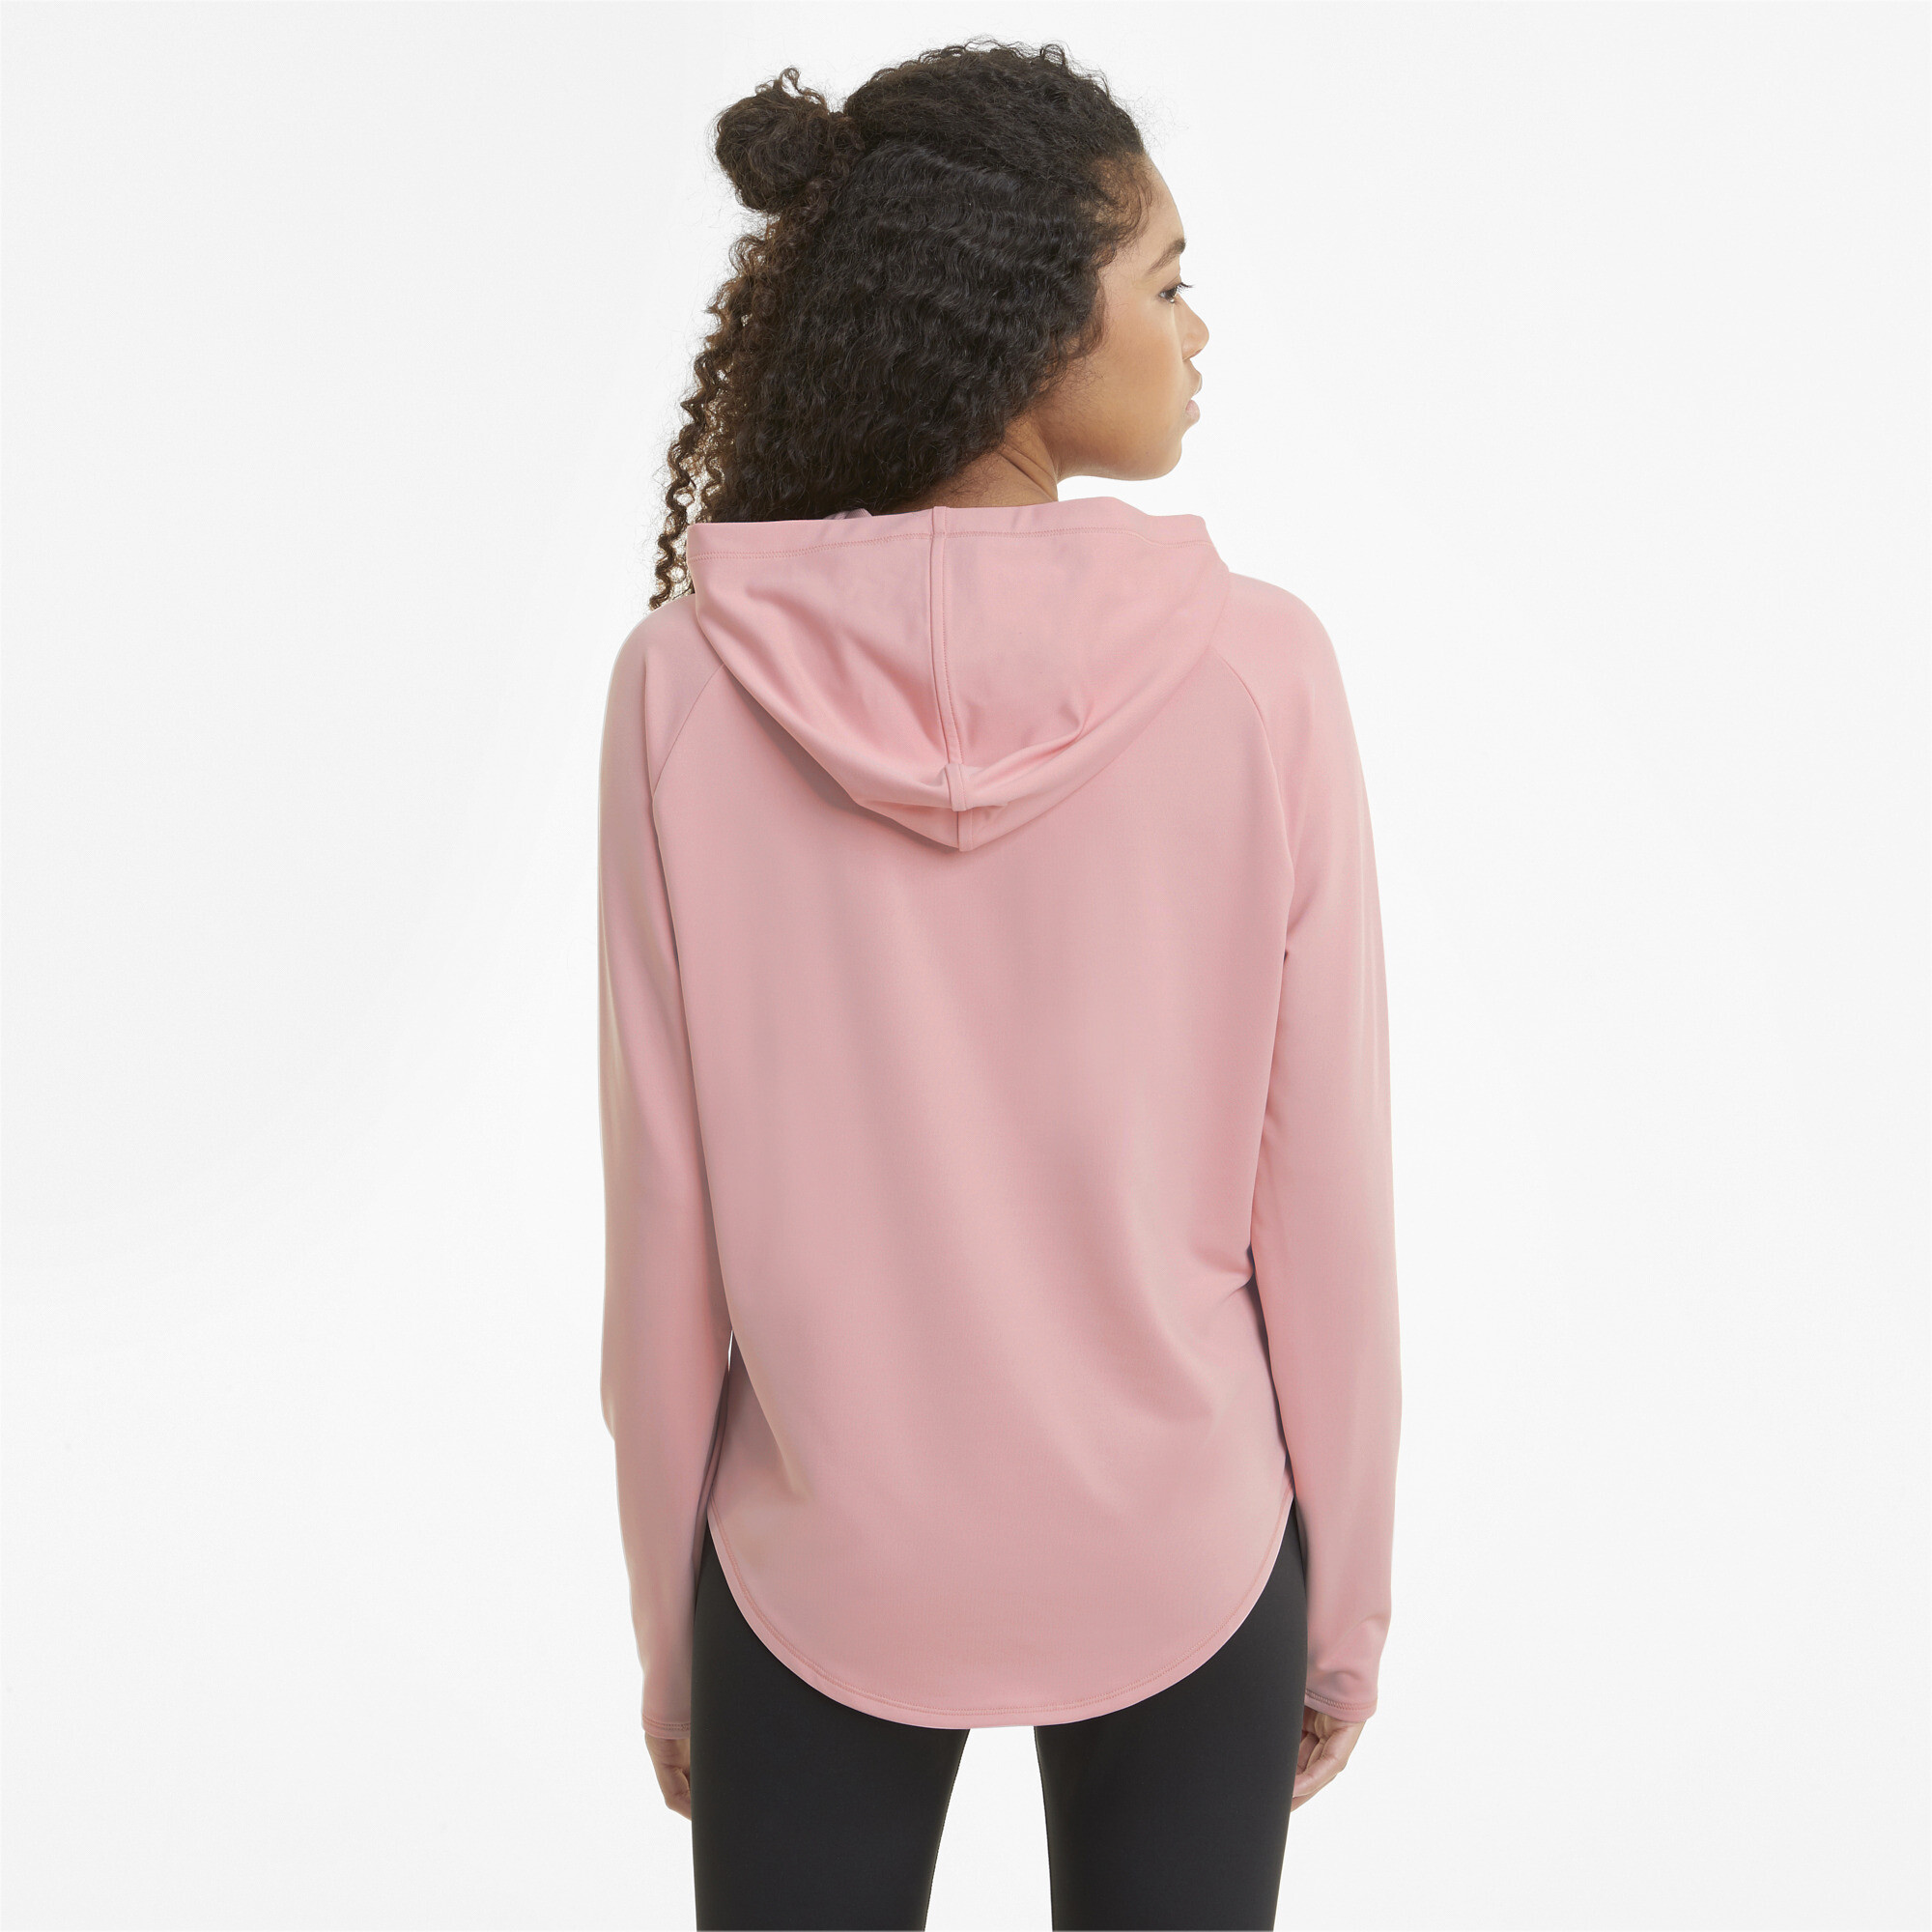 Women's Puma Active's Hoodie, Pink, Size M, Clothing